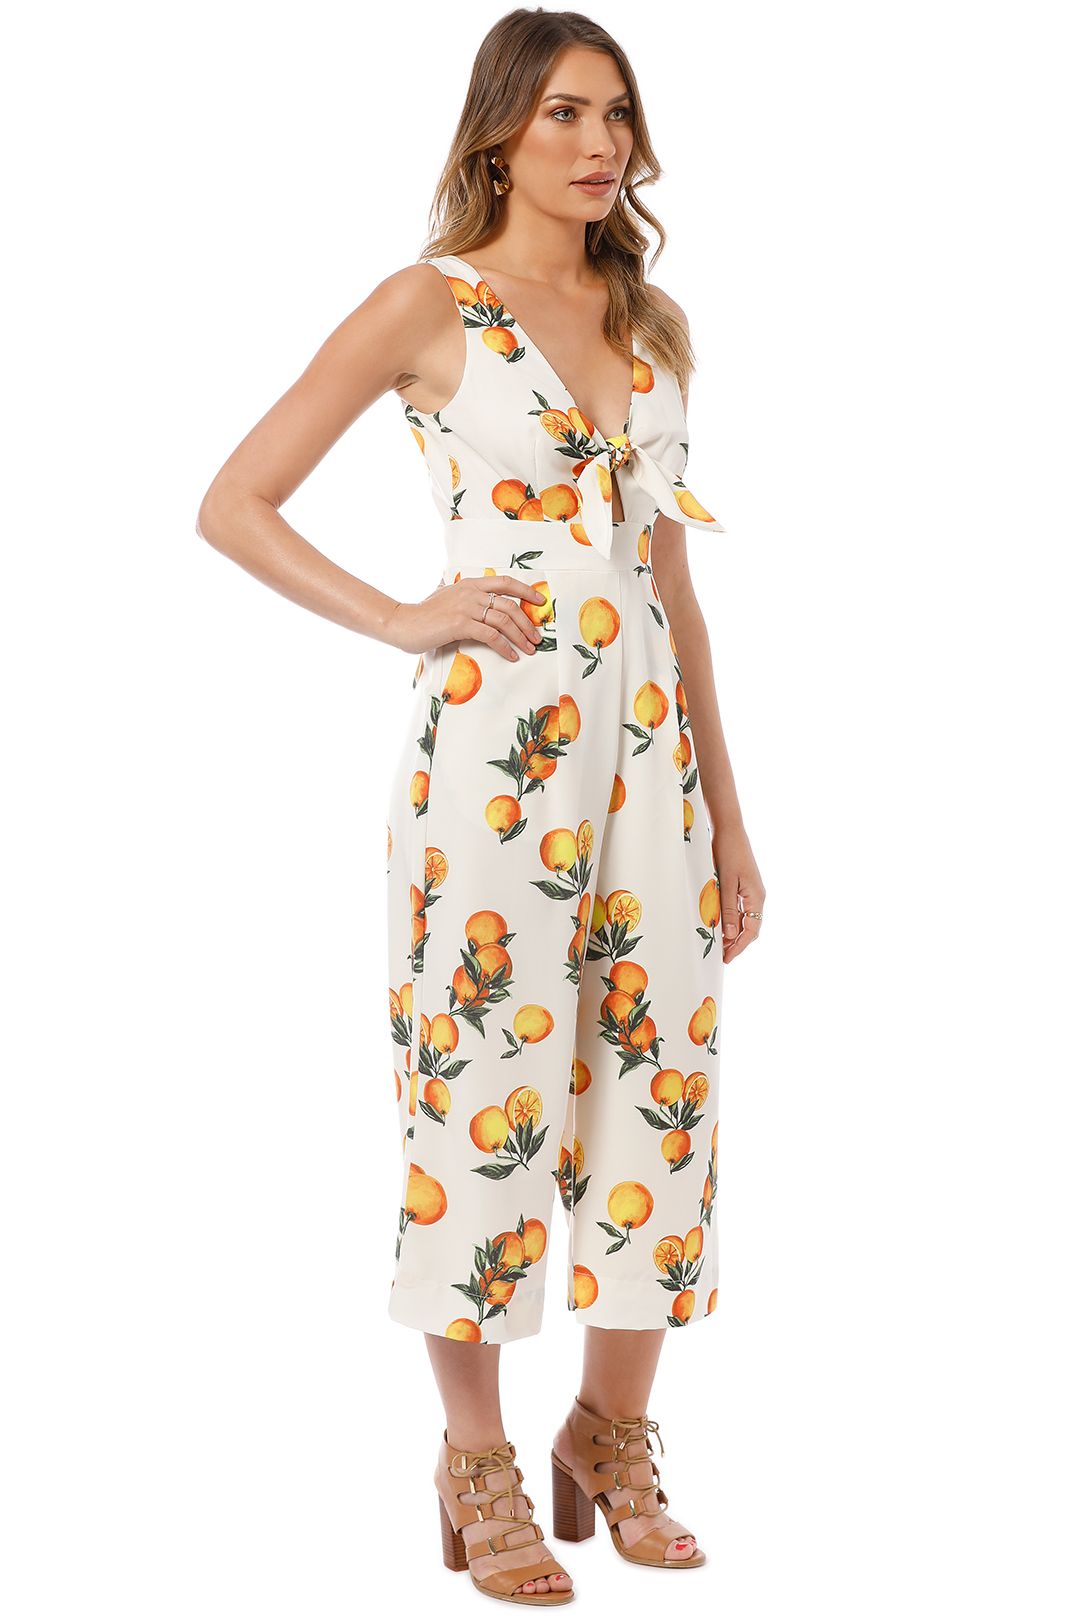 sheike dolce jumpsuit